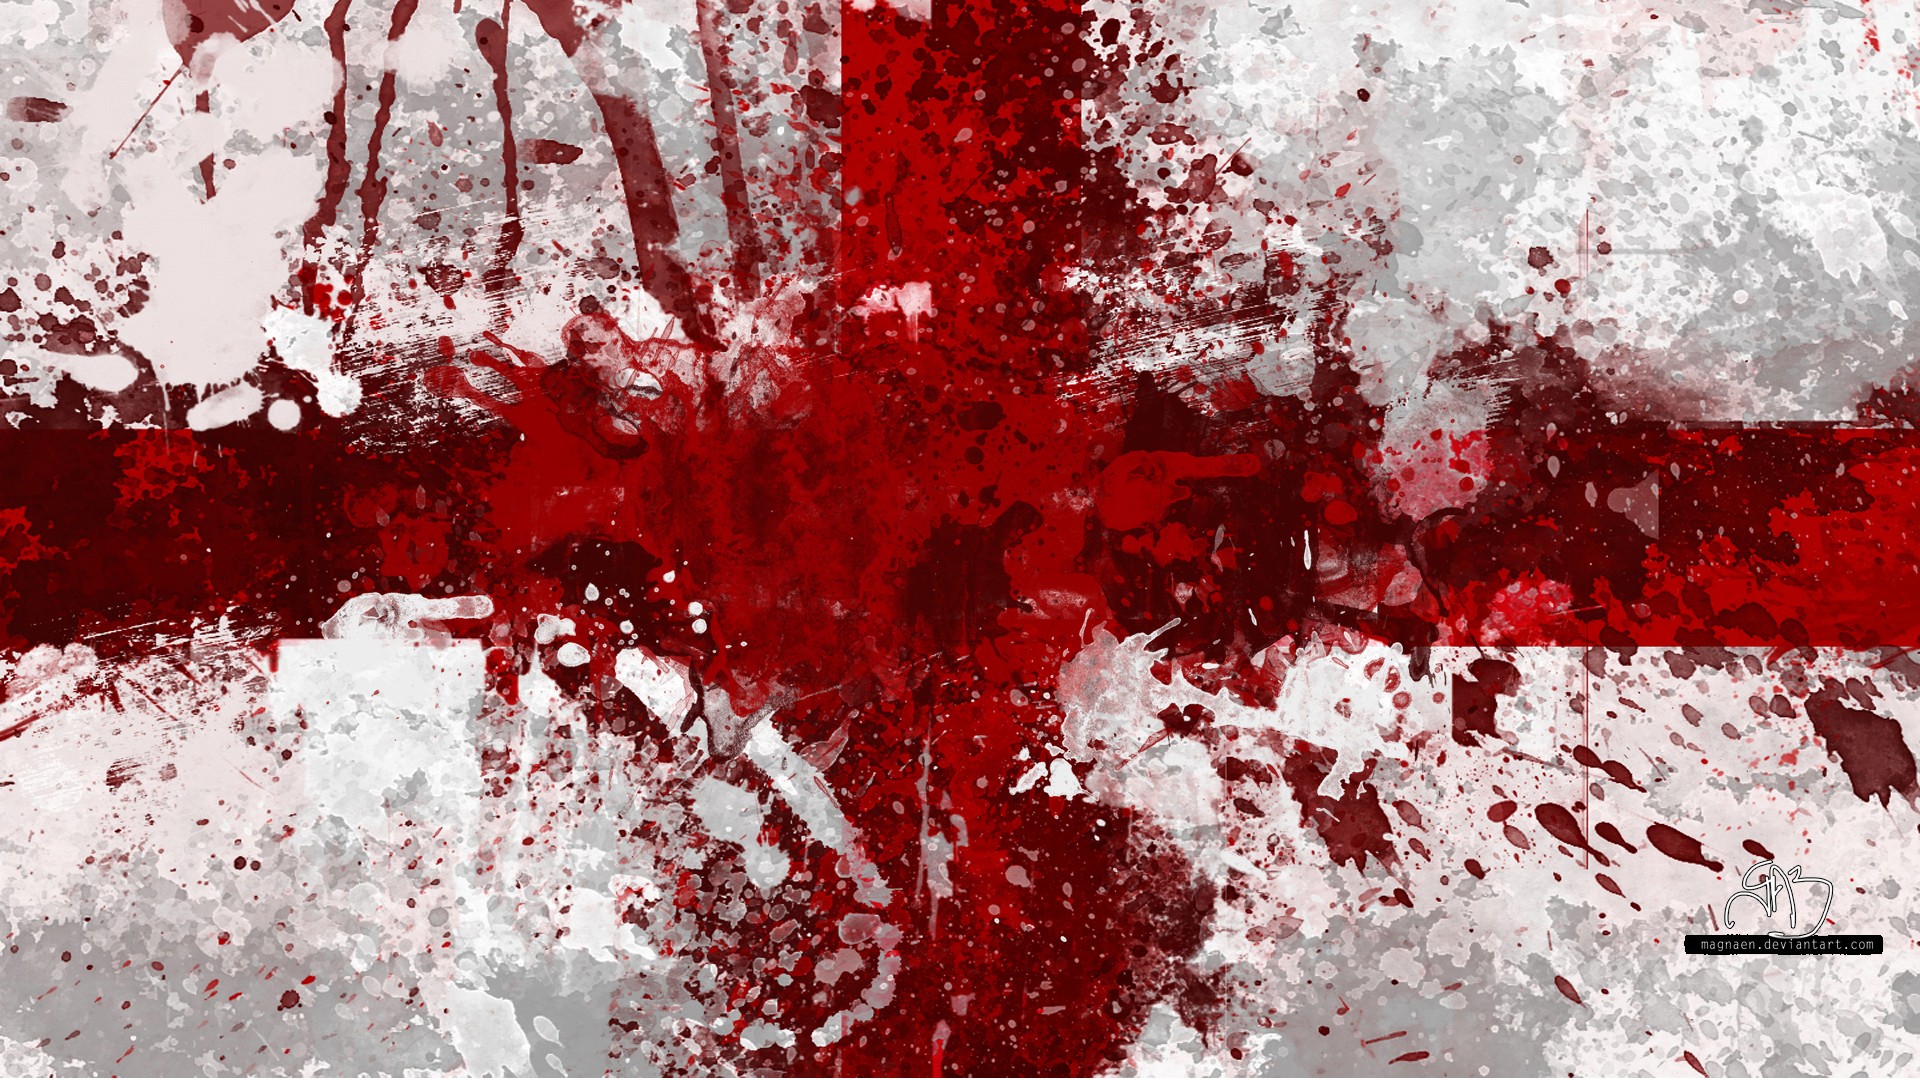 Bloody wallpaper ·① Download free cool backgrounds for ...